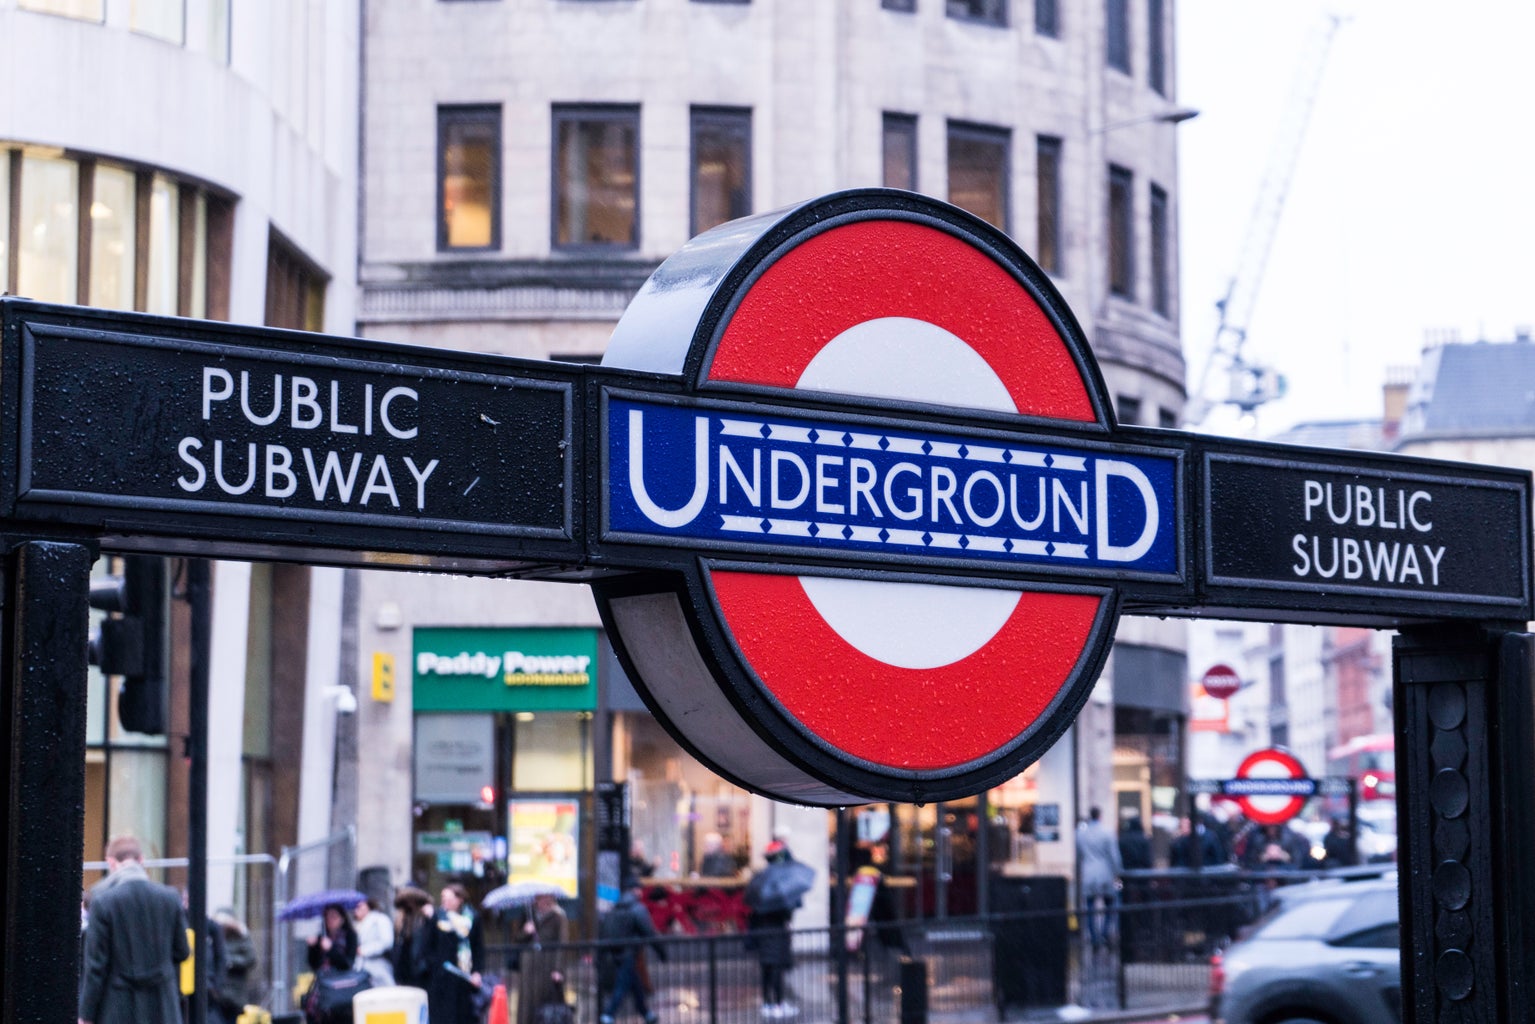 a picture of an Underground tube station sign